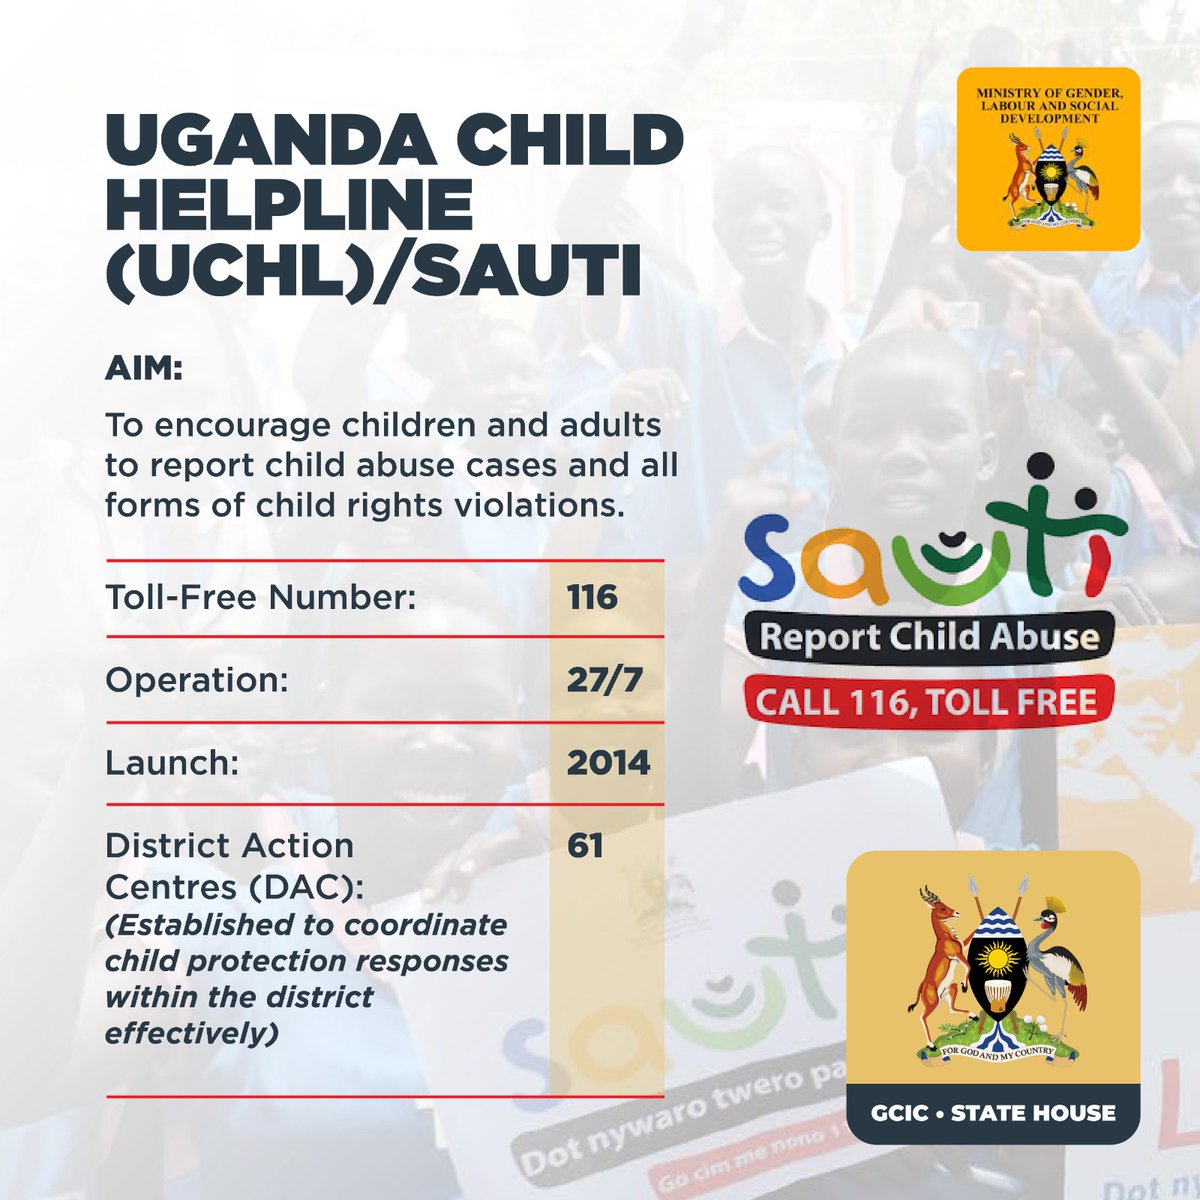 If you see a kid being hurt, dial 116.

#OpenGovUG
#ReportChildAbuse